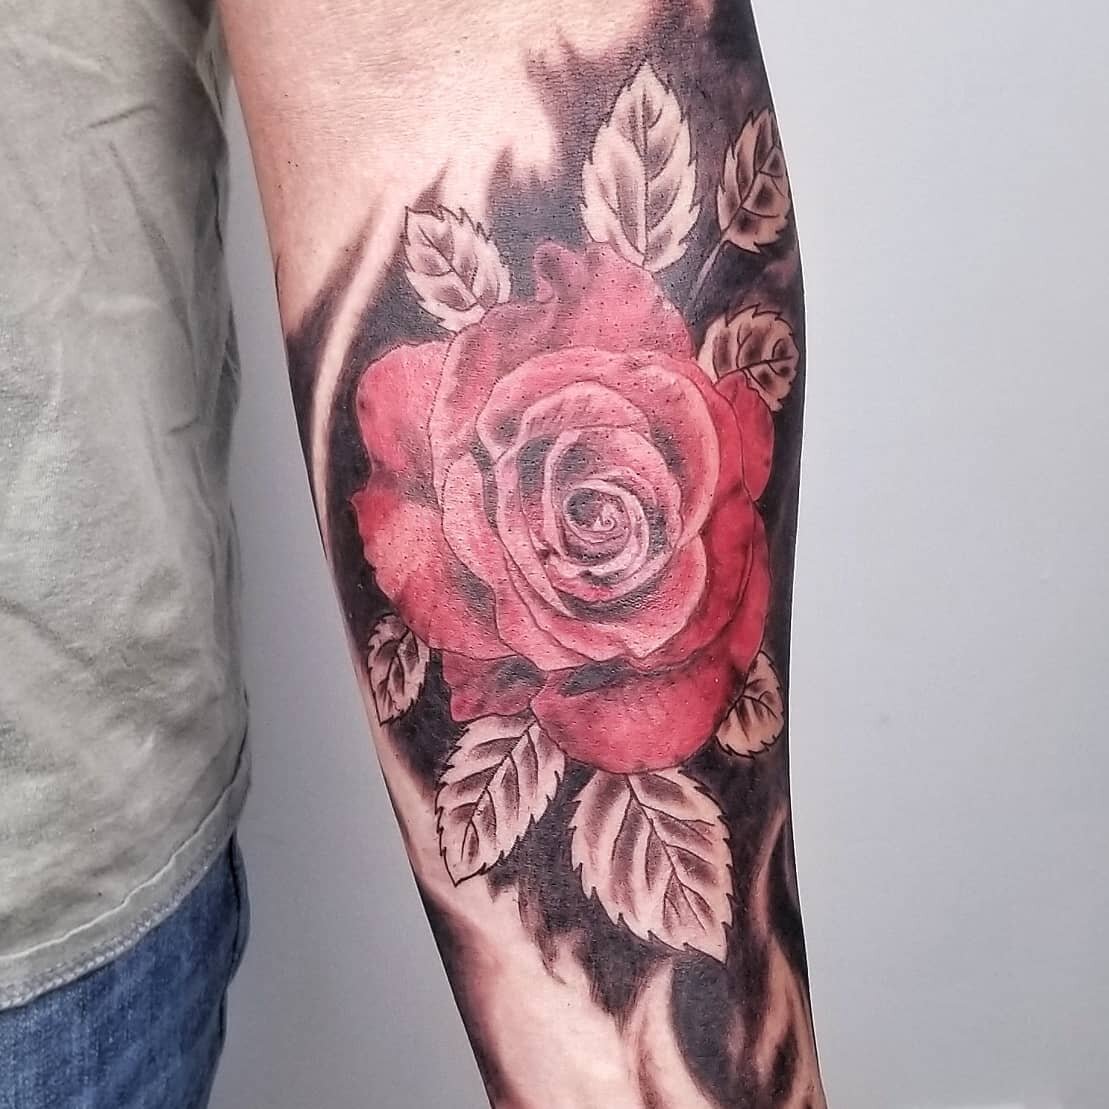 First tattoo for Brian. 
Such amazing commitment! Happy with the end result. Done over 2 days back to back at my private studio. 
#colortattoo #redrosetattoo #abstracttattoos #realistictattoo #flowertattoos #rosetattoos